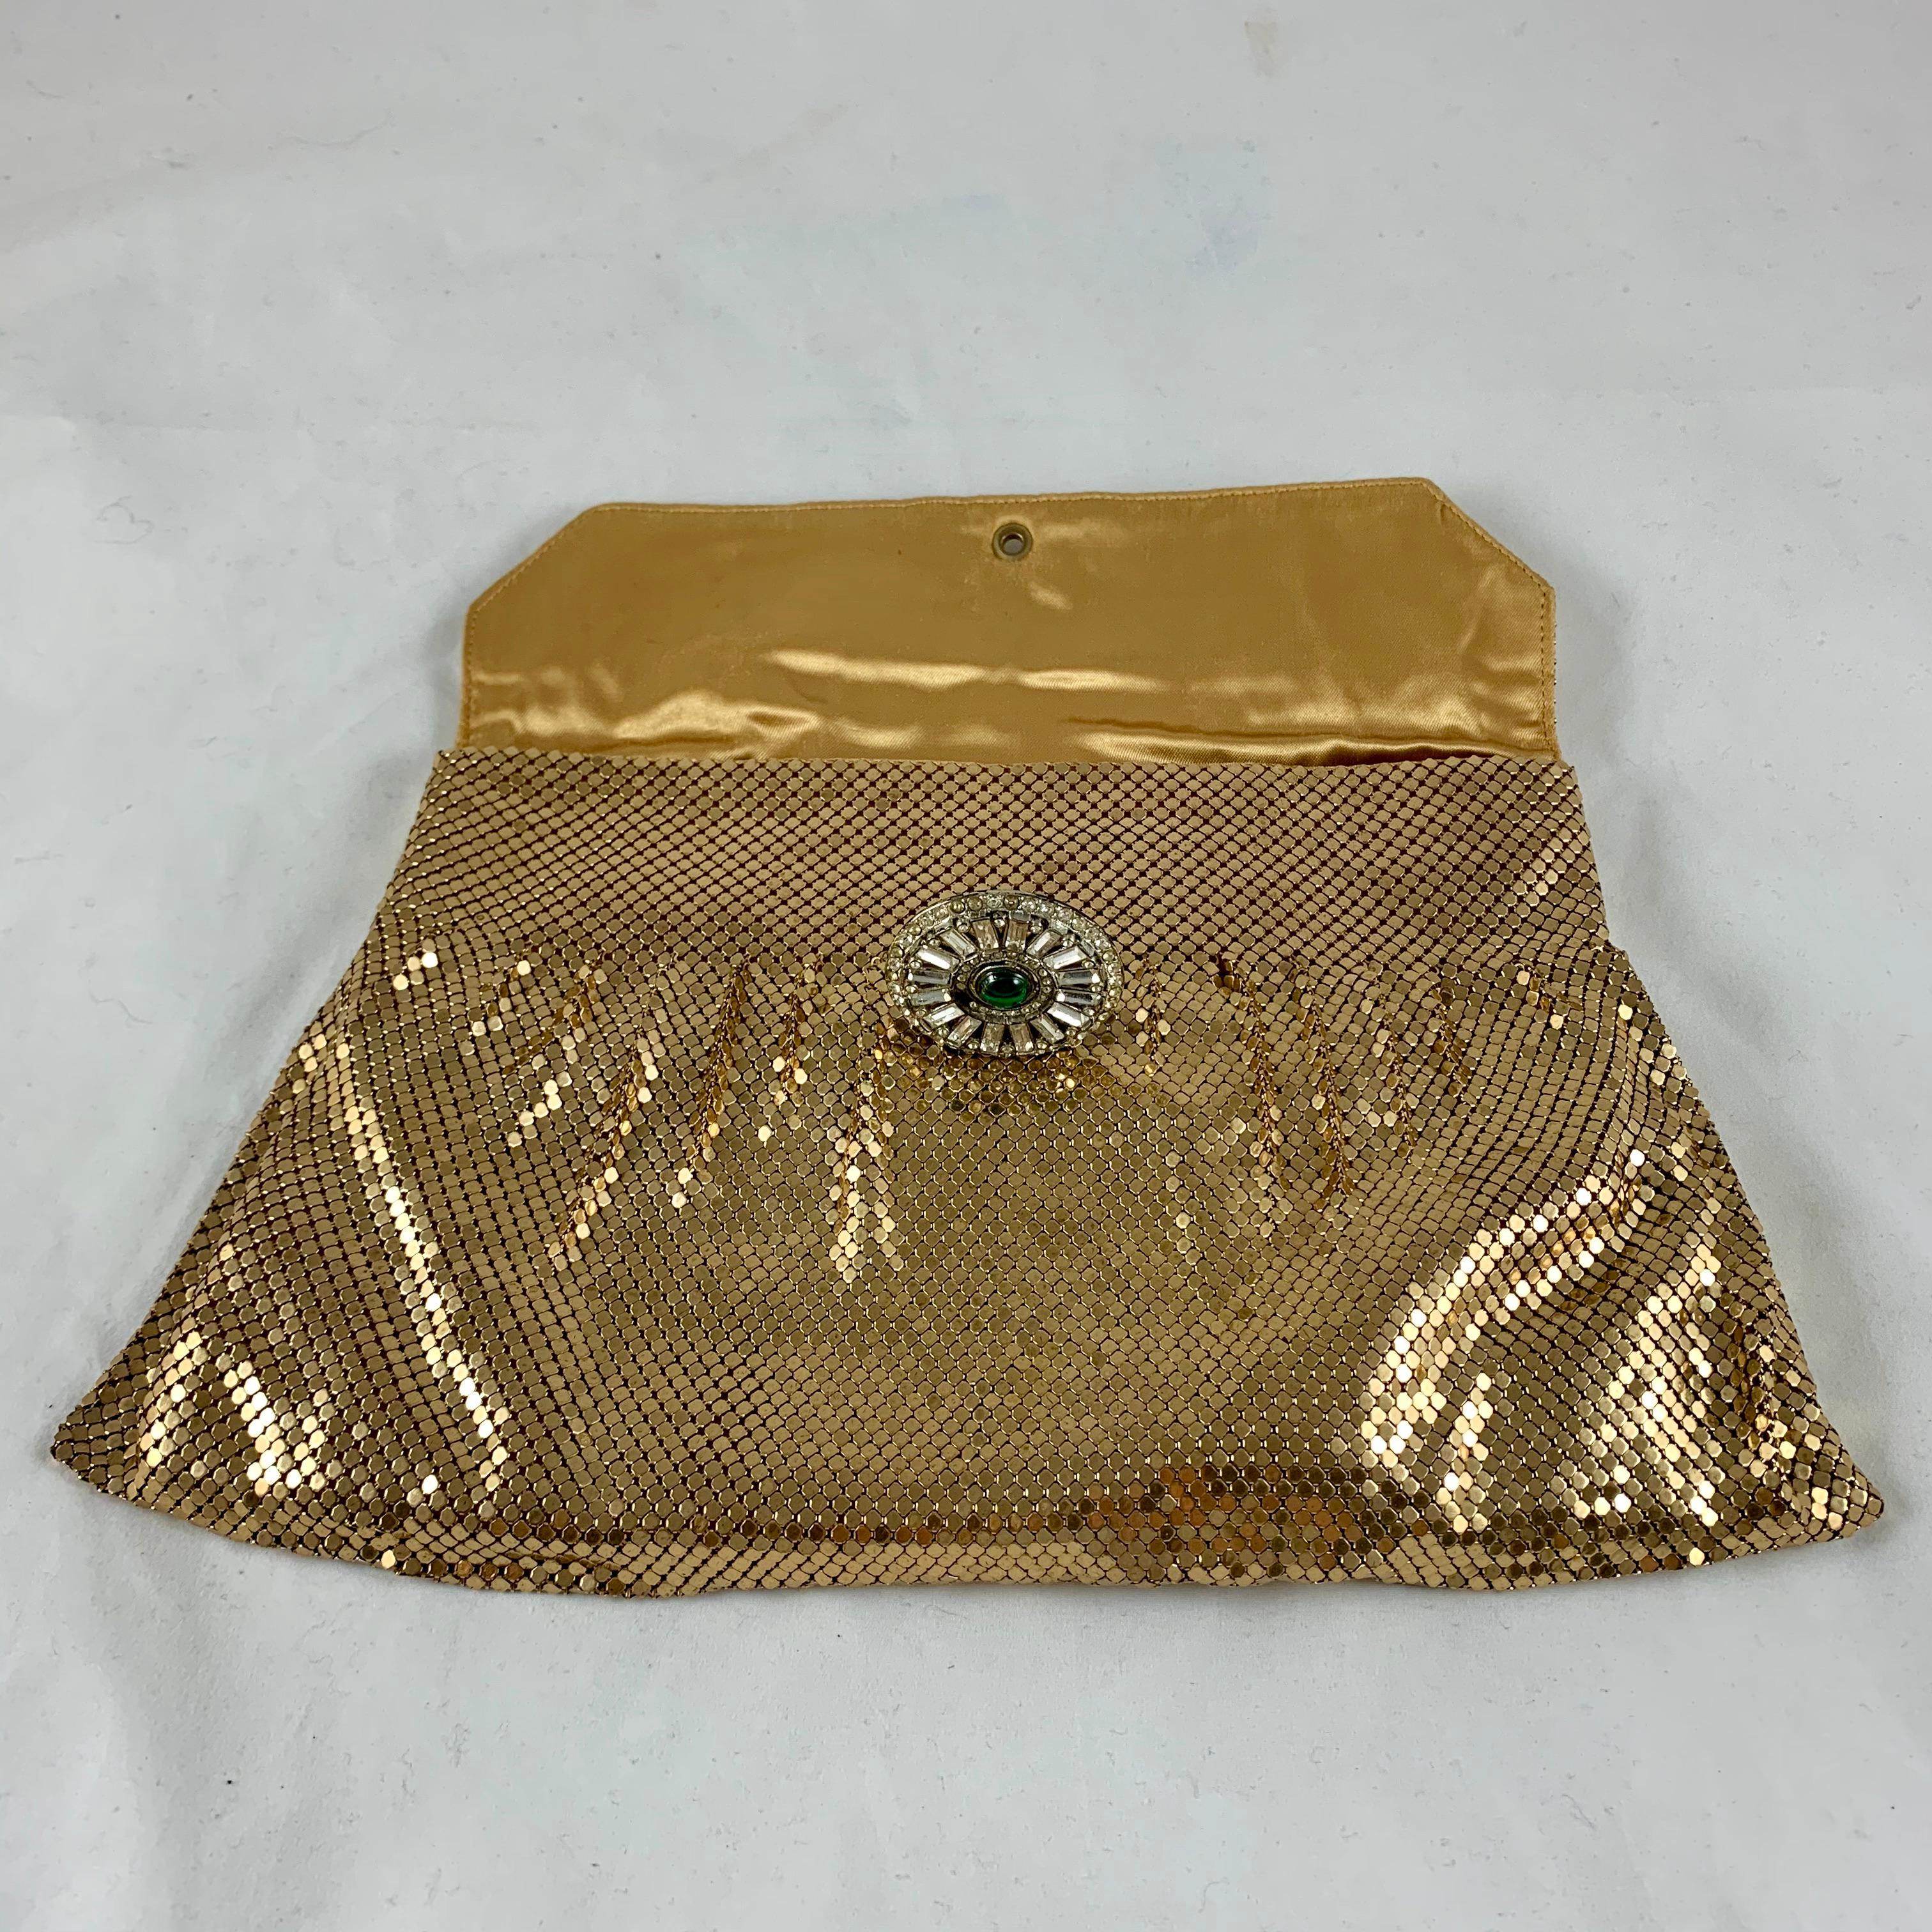 Appliqué 1950s Whiting and Davis Gold Mesh Jewel Closure Evening Clutch with Coin Purse For Sale